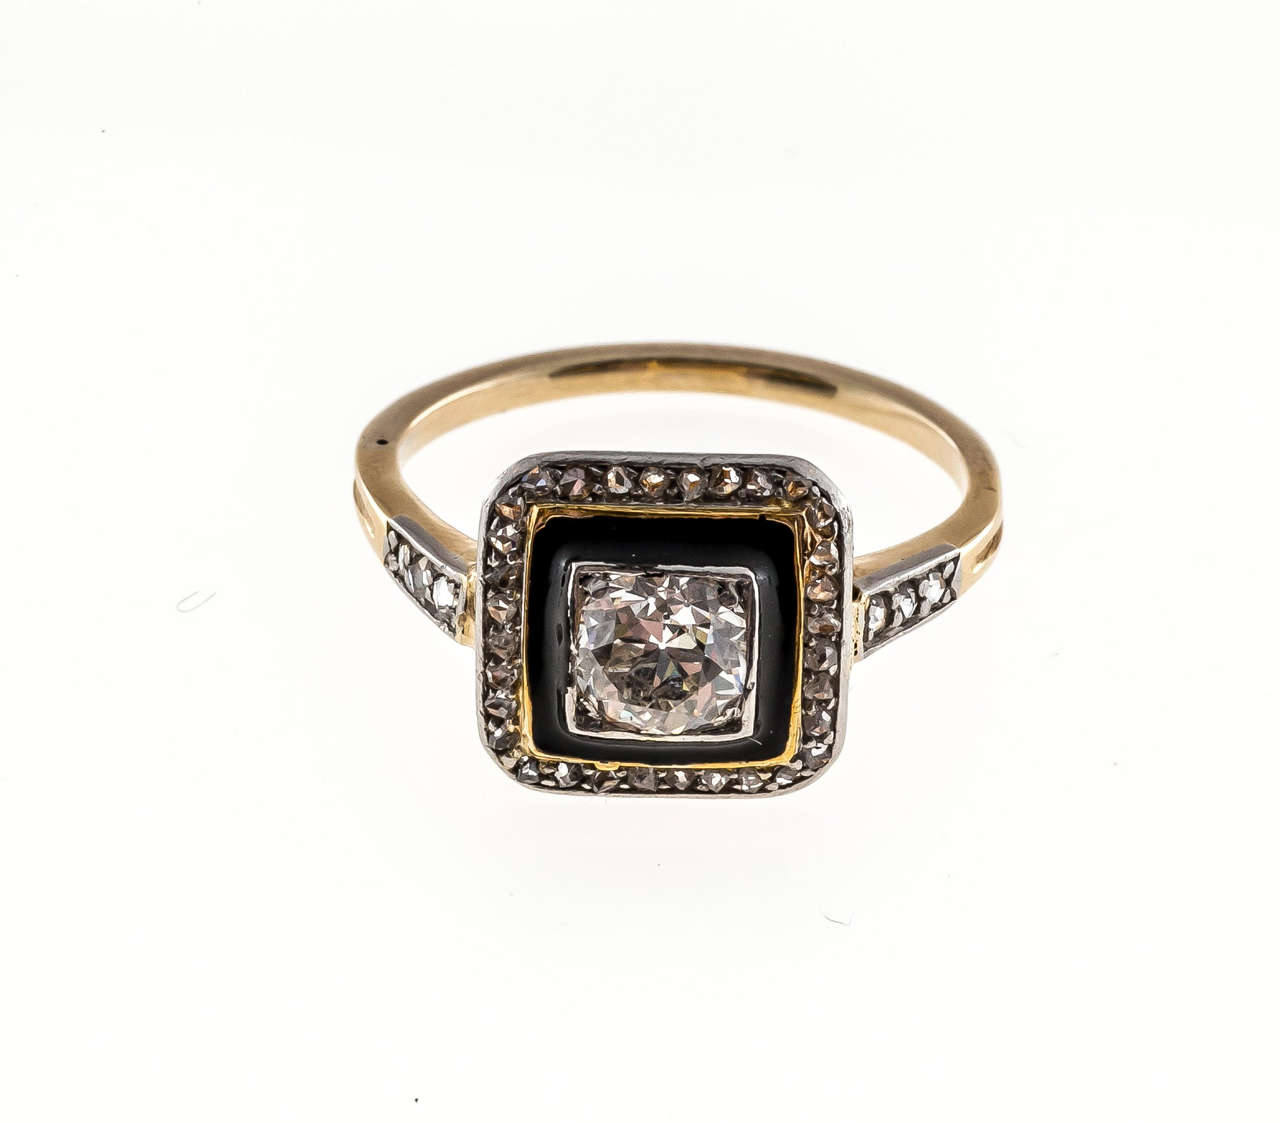 The shoulders and outer rim are set with all original rose cut diamonds.  The center is set with a beautiful well cut European cut diamond.  Around the center diamond is a black enamel rim.  This makes for a striking Art Deco Design.  Very good